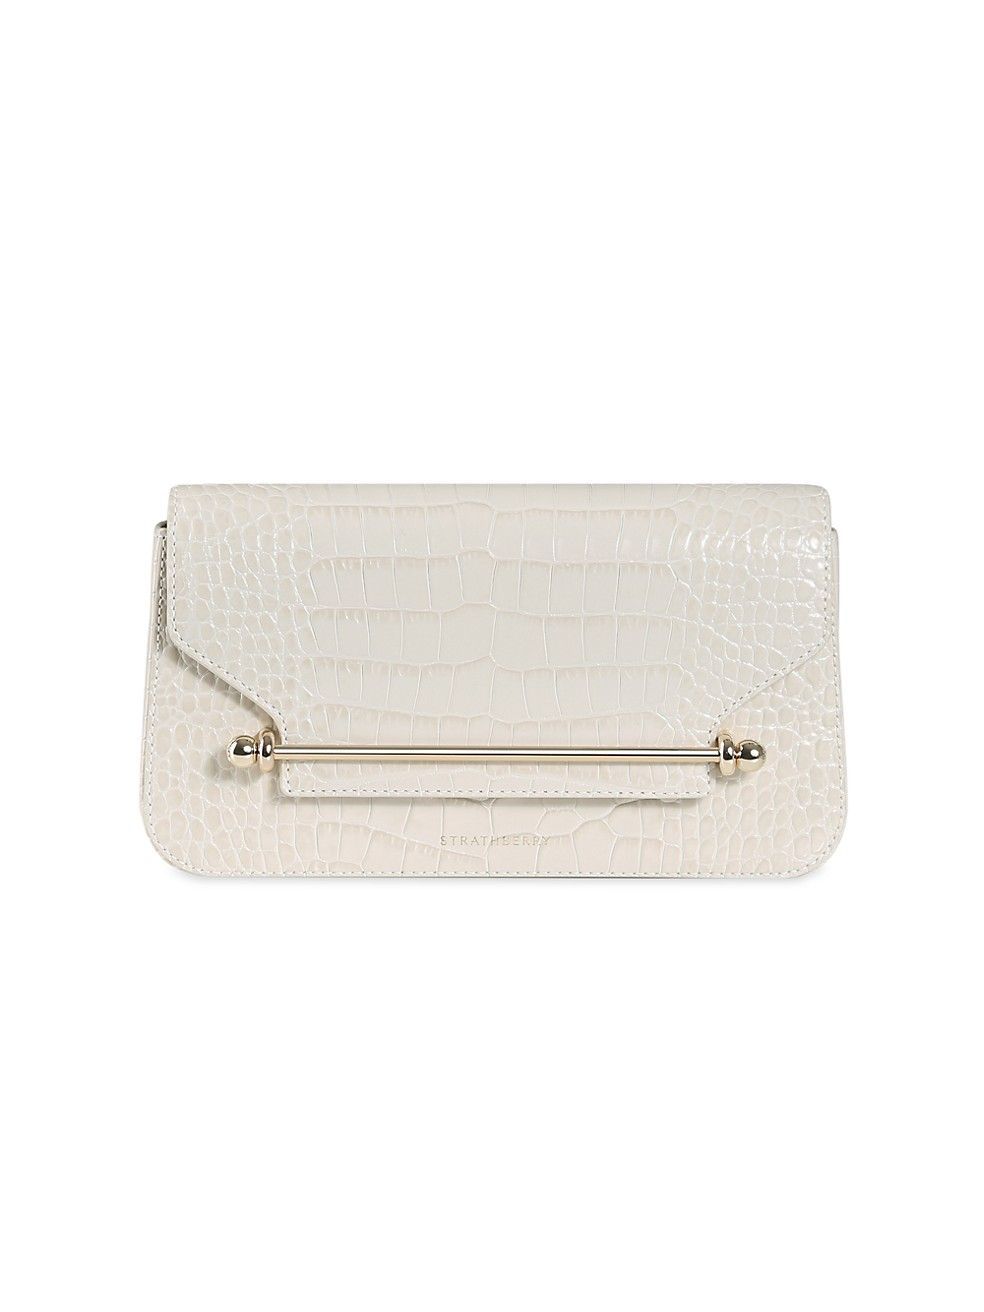 Strathberry East/West Leather Clutch | Saks Fifth Avenue